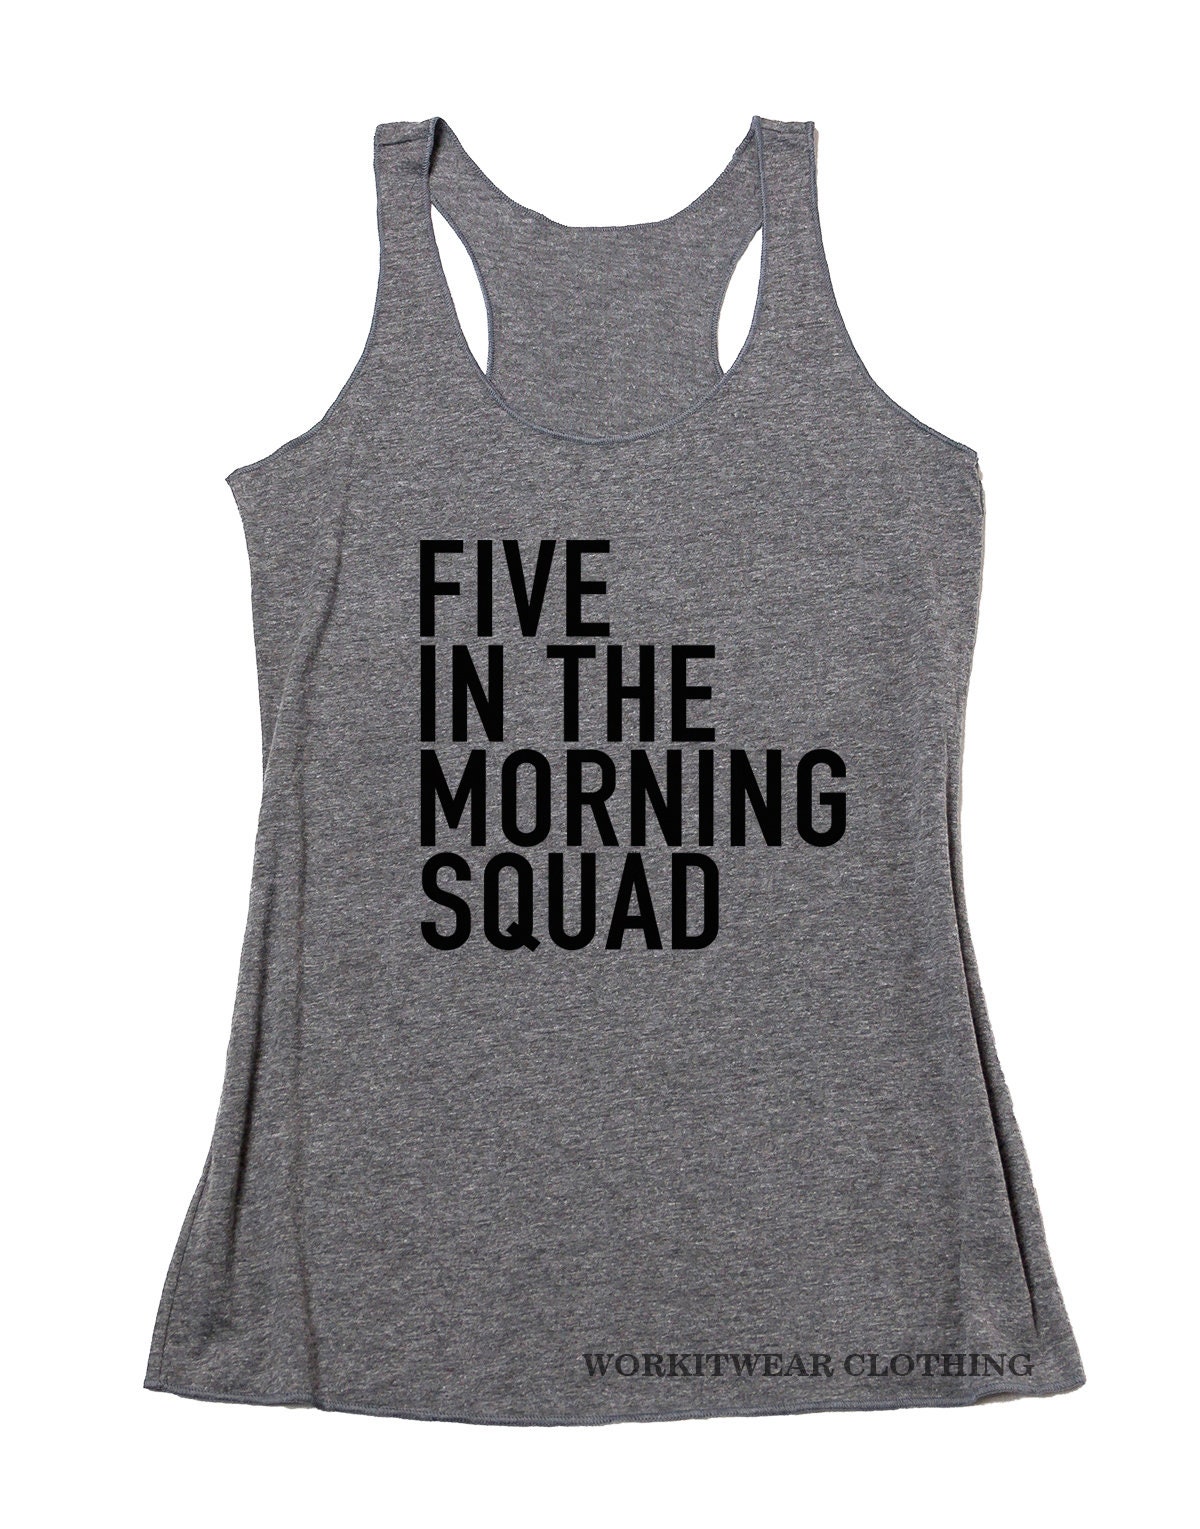 Five Squad Spinbabe Fitness Tank Gym Shirt Exercise Tank Yoga Rise and Shine 5AM Crew Workout Tank Five In The Morning Crazies Tread